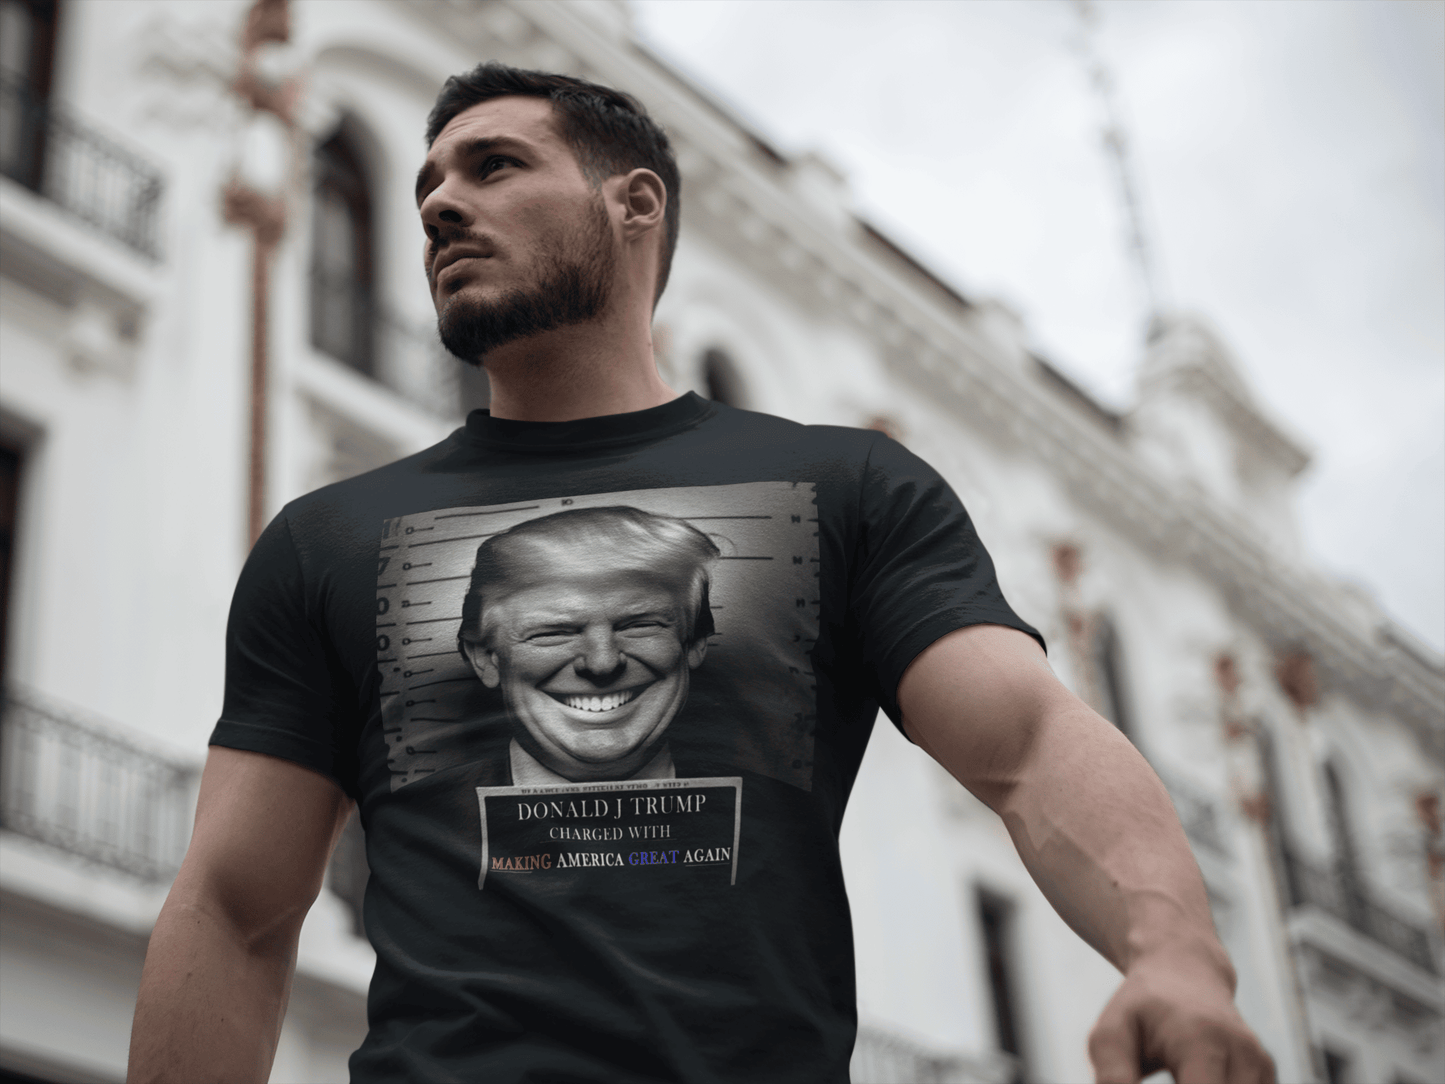 T-SHIRT - CHARGED WITH MAKING AMERICA GREAT AGAIN